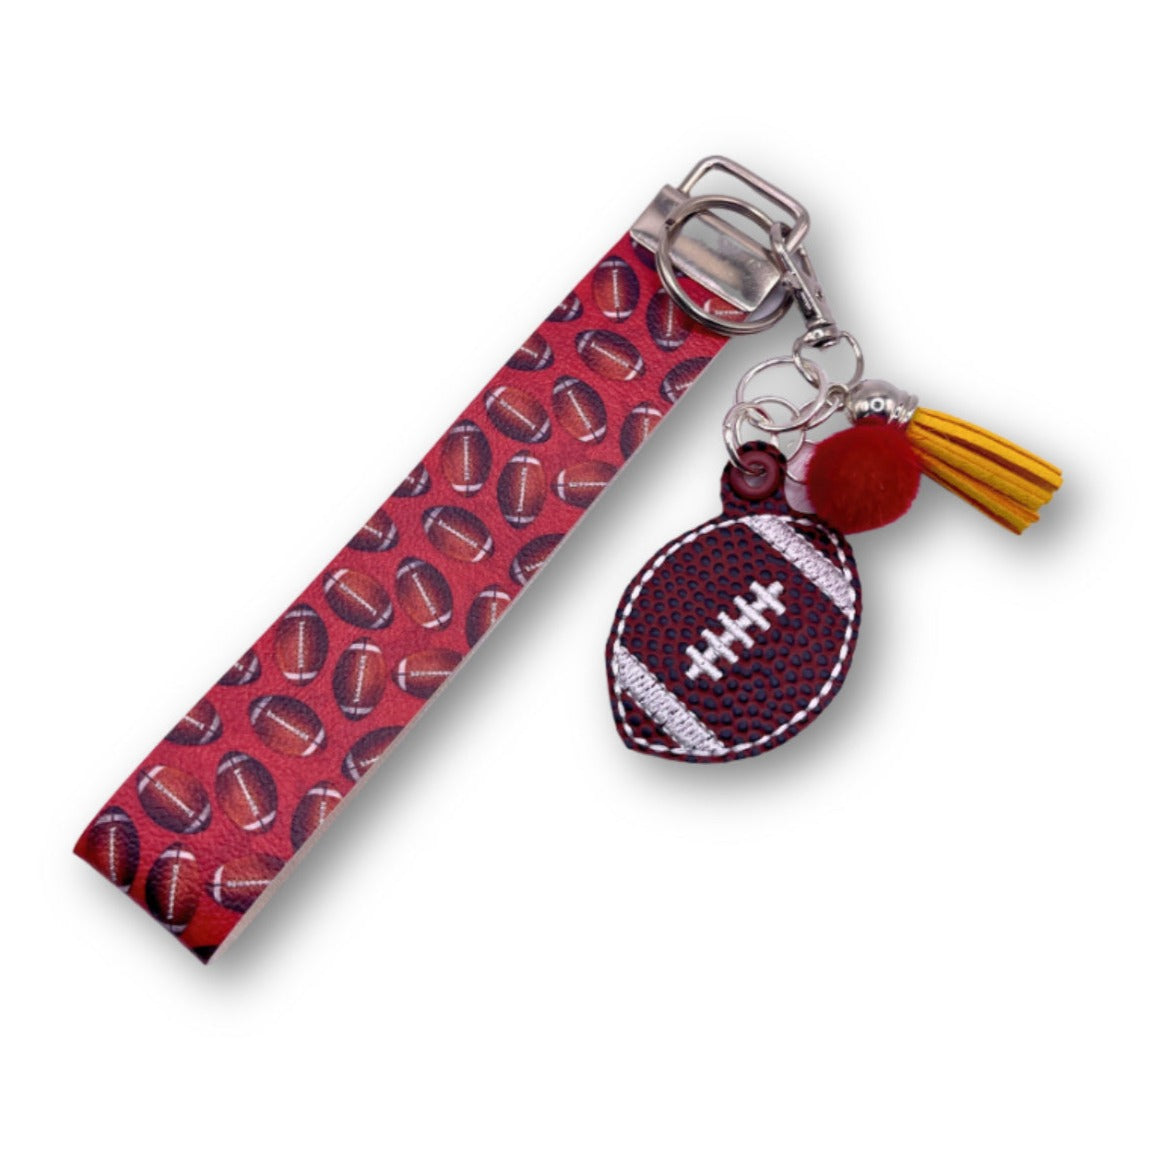 Red and Yellow Football key chain with wristlet